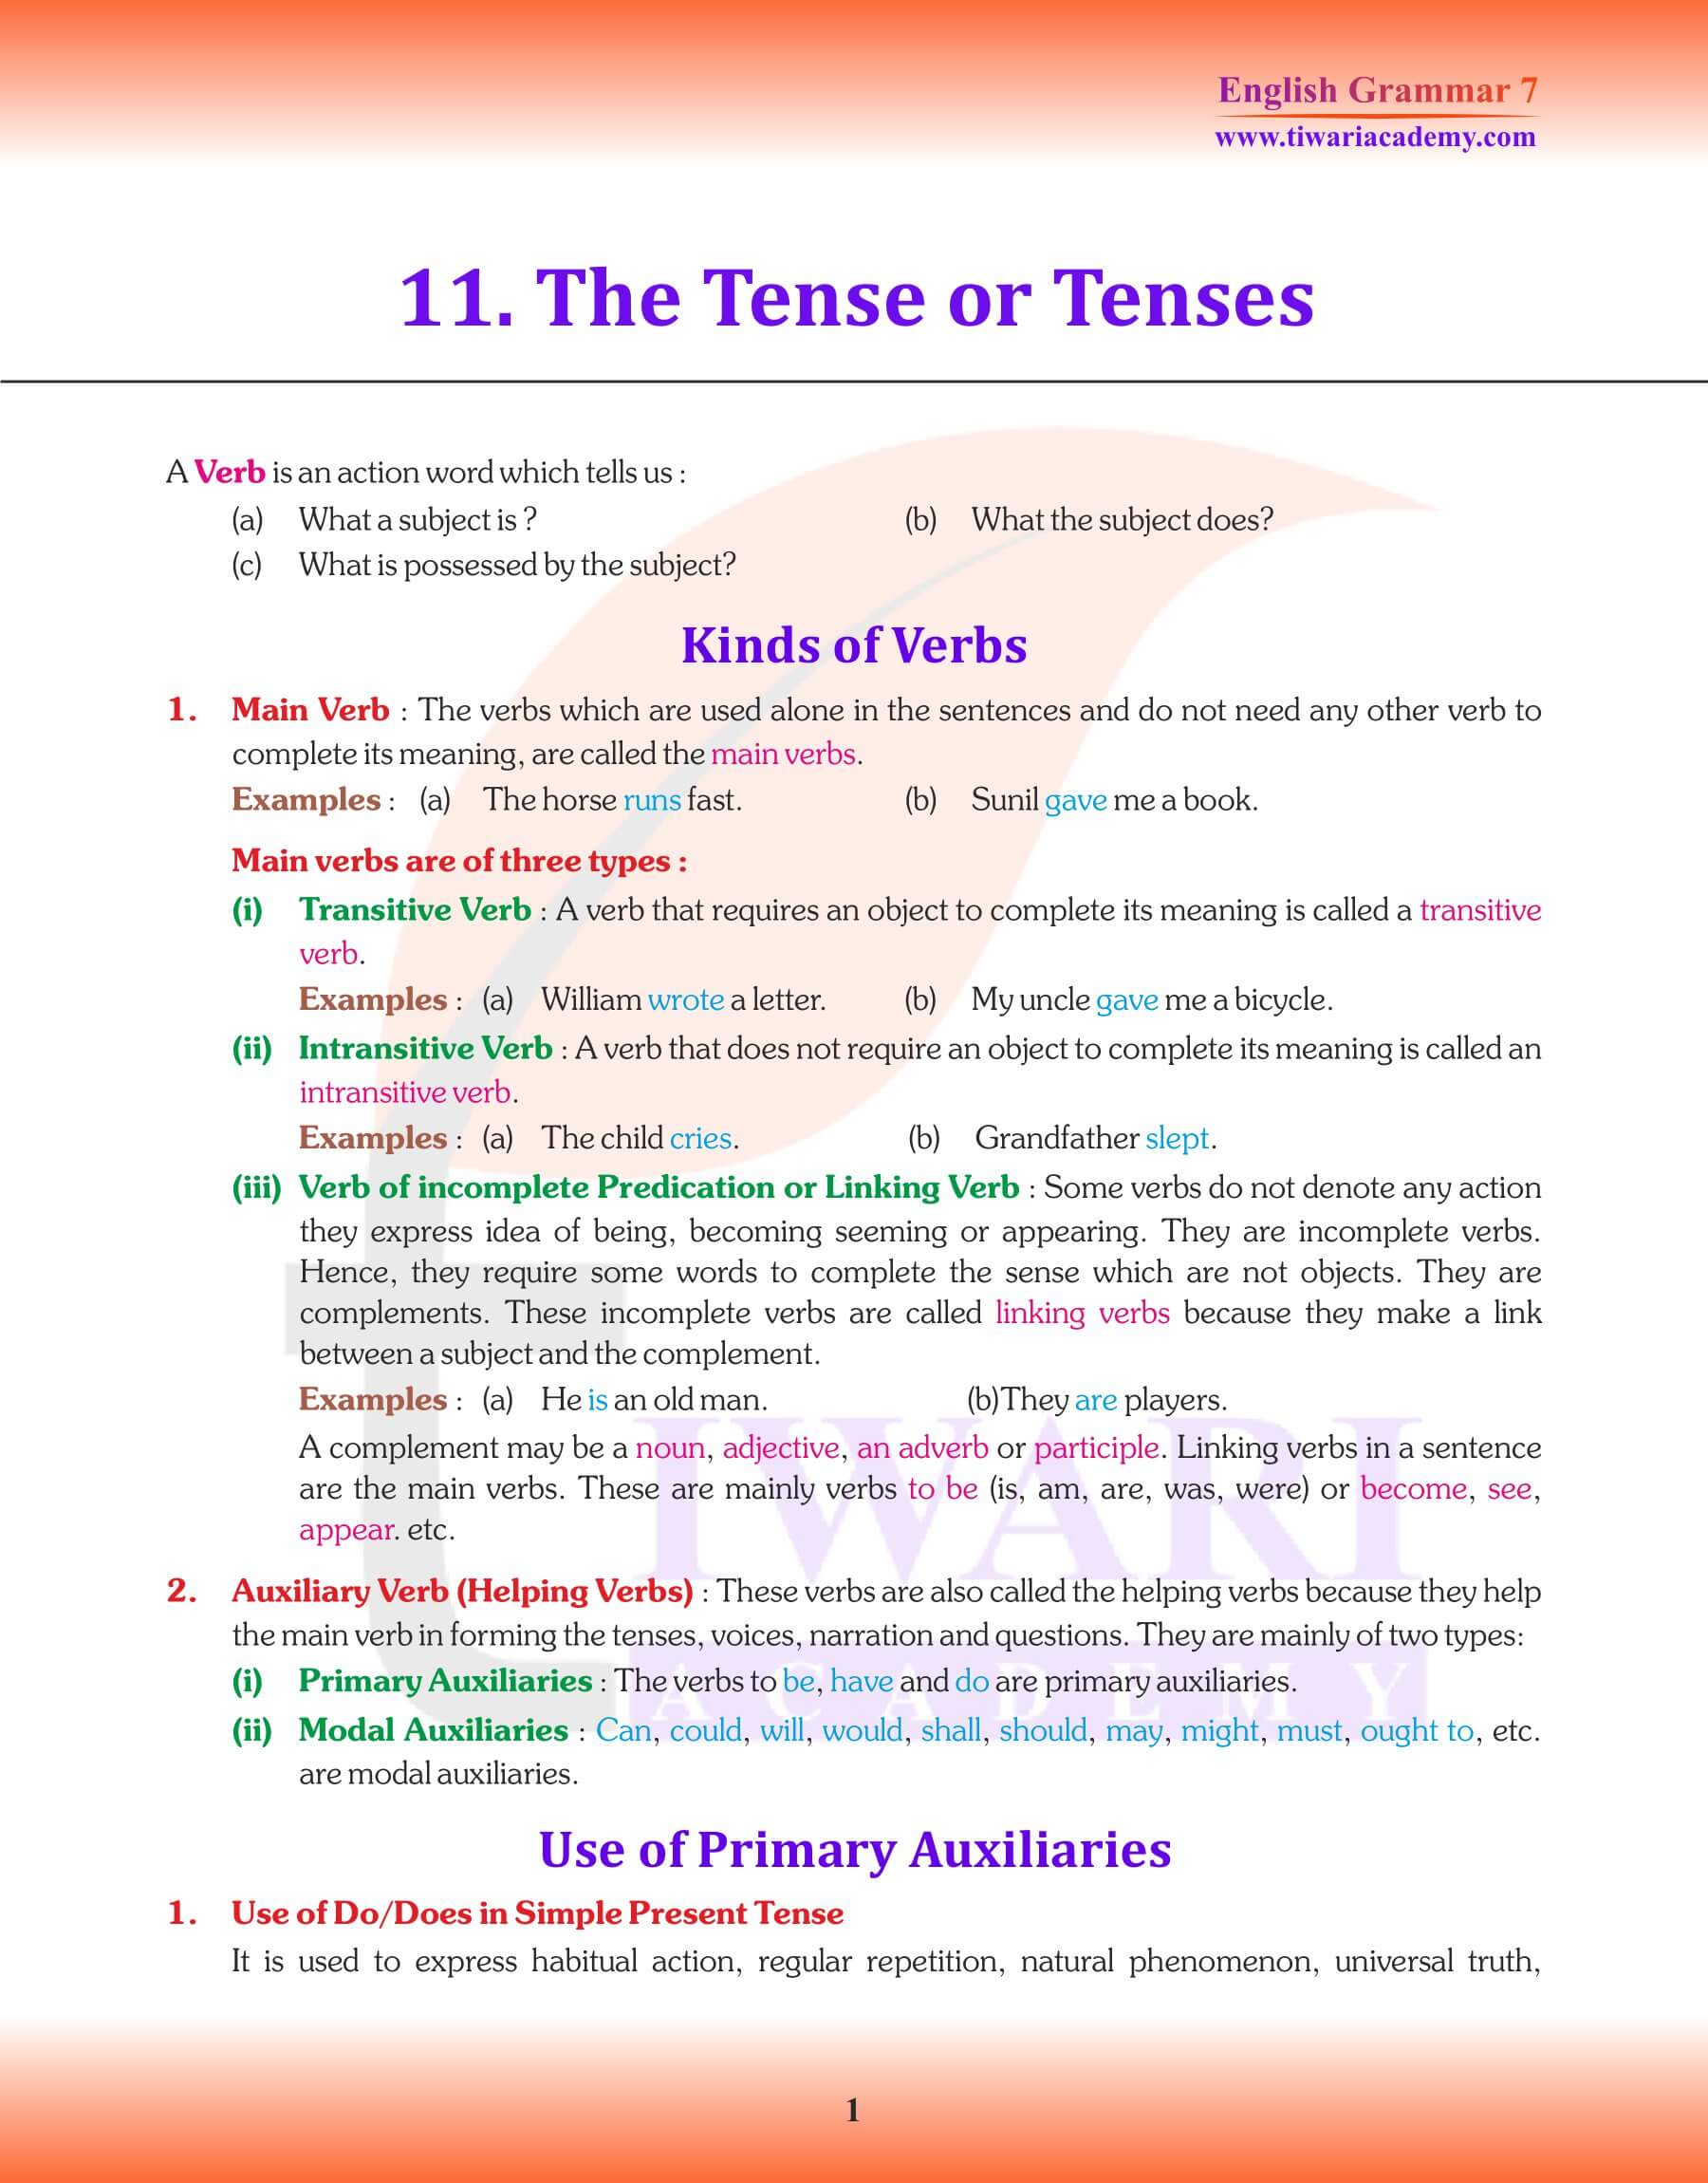 Class 7 English Grammar Chapter 11 Revision Book